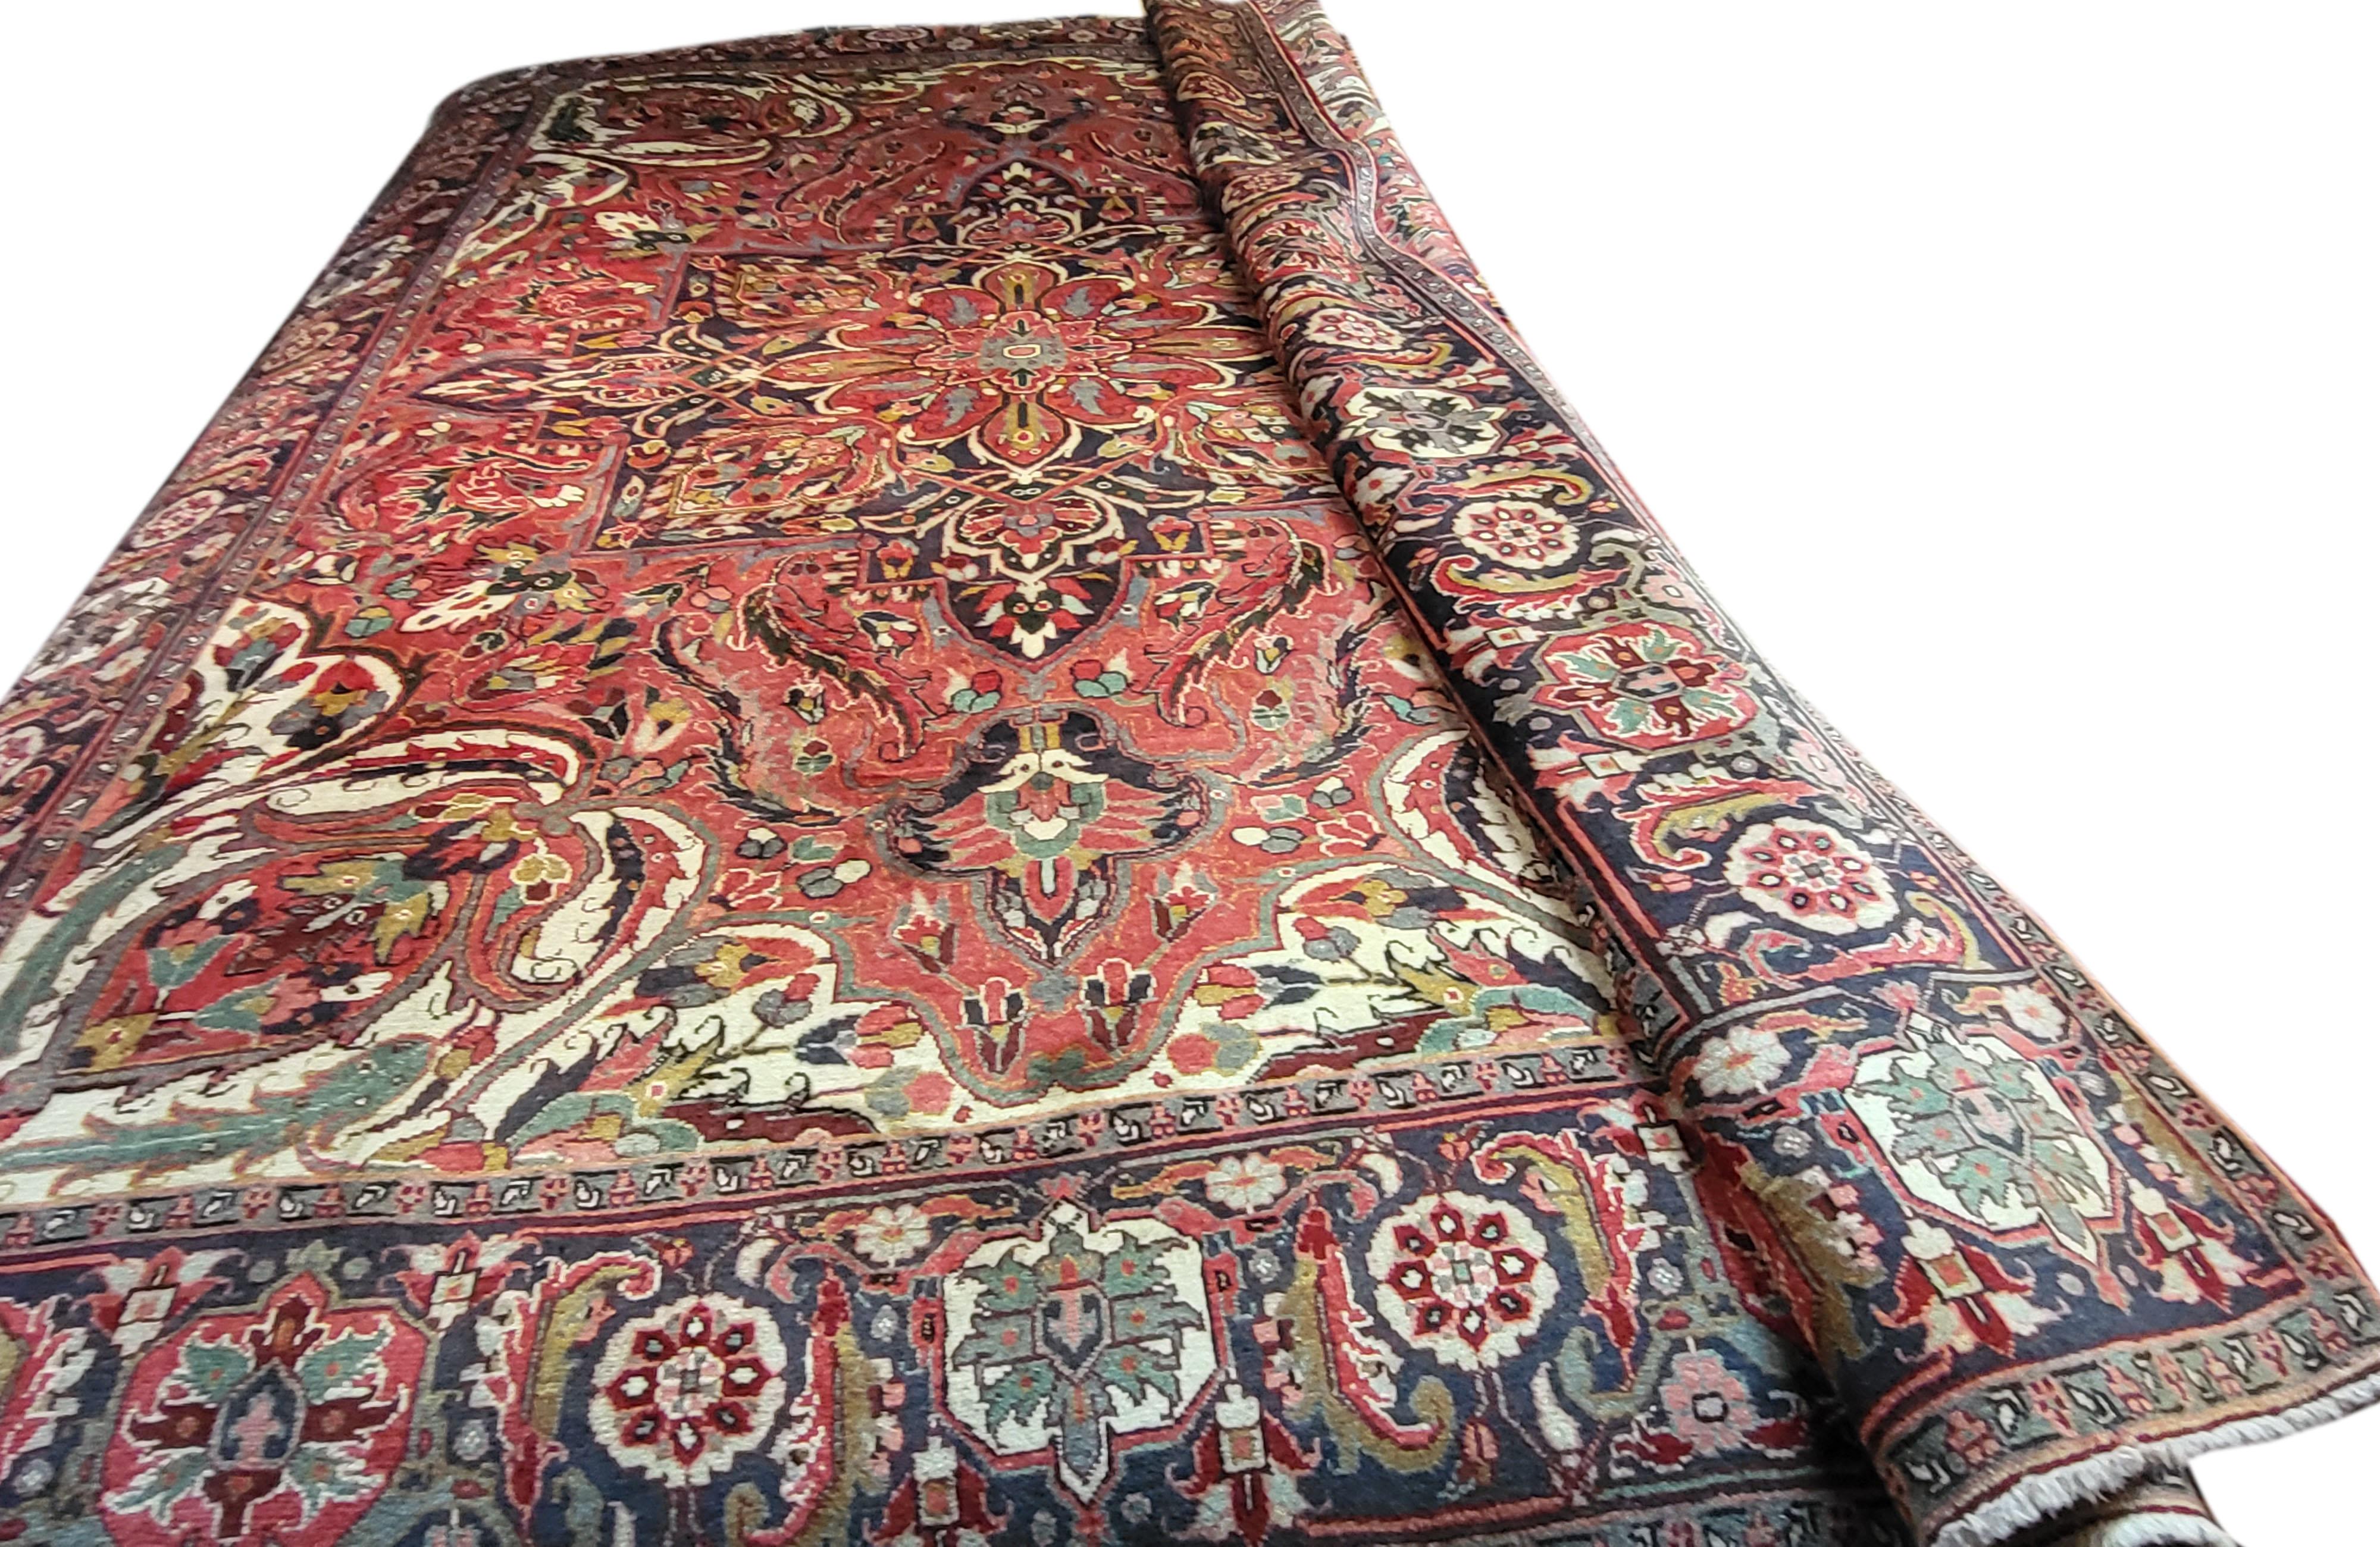 Incredible 50's authentic Persian Heriz. Heriz's are the most popular Persian rug in the world and with that we aim to offer a variety of harder to find, more exclusive designs. All of our Heriz's are authentic and hand woven in Iran. This Heriz